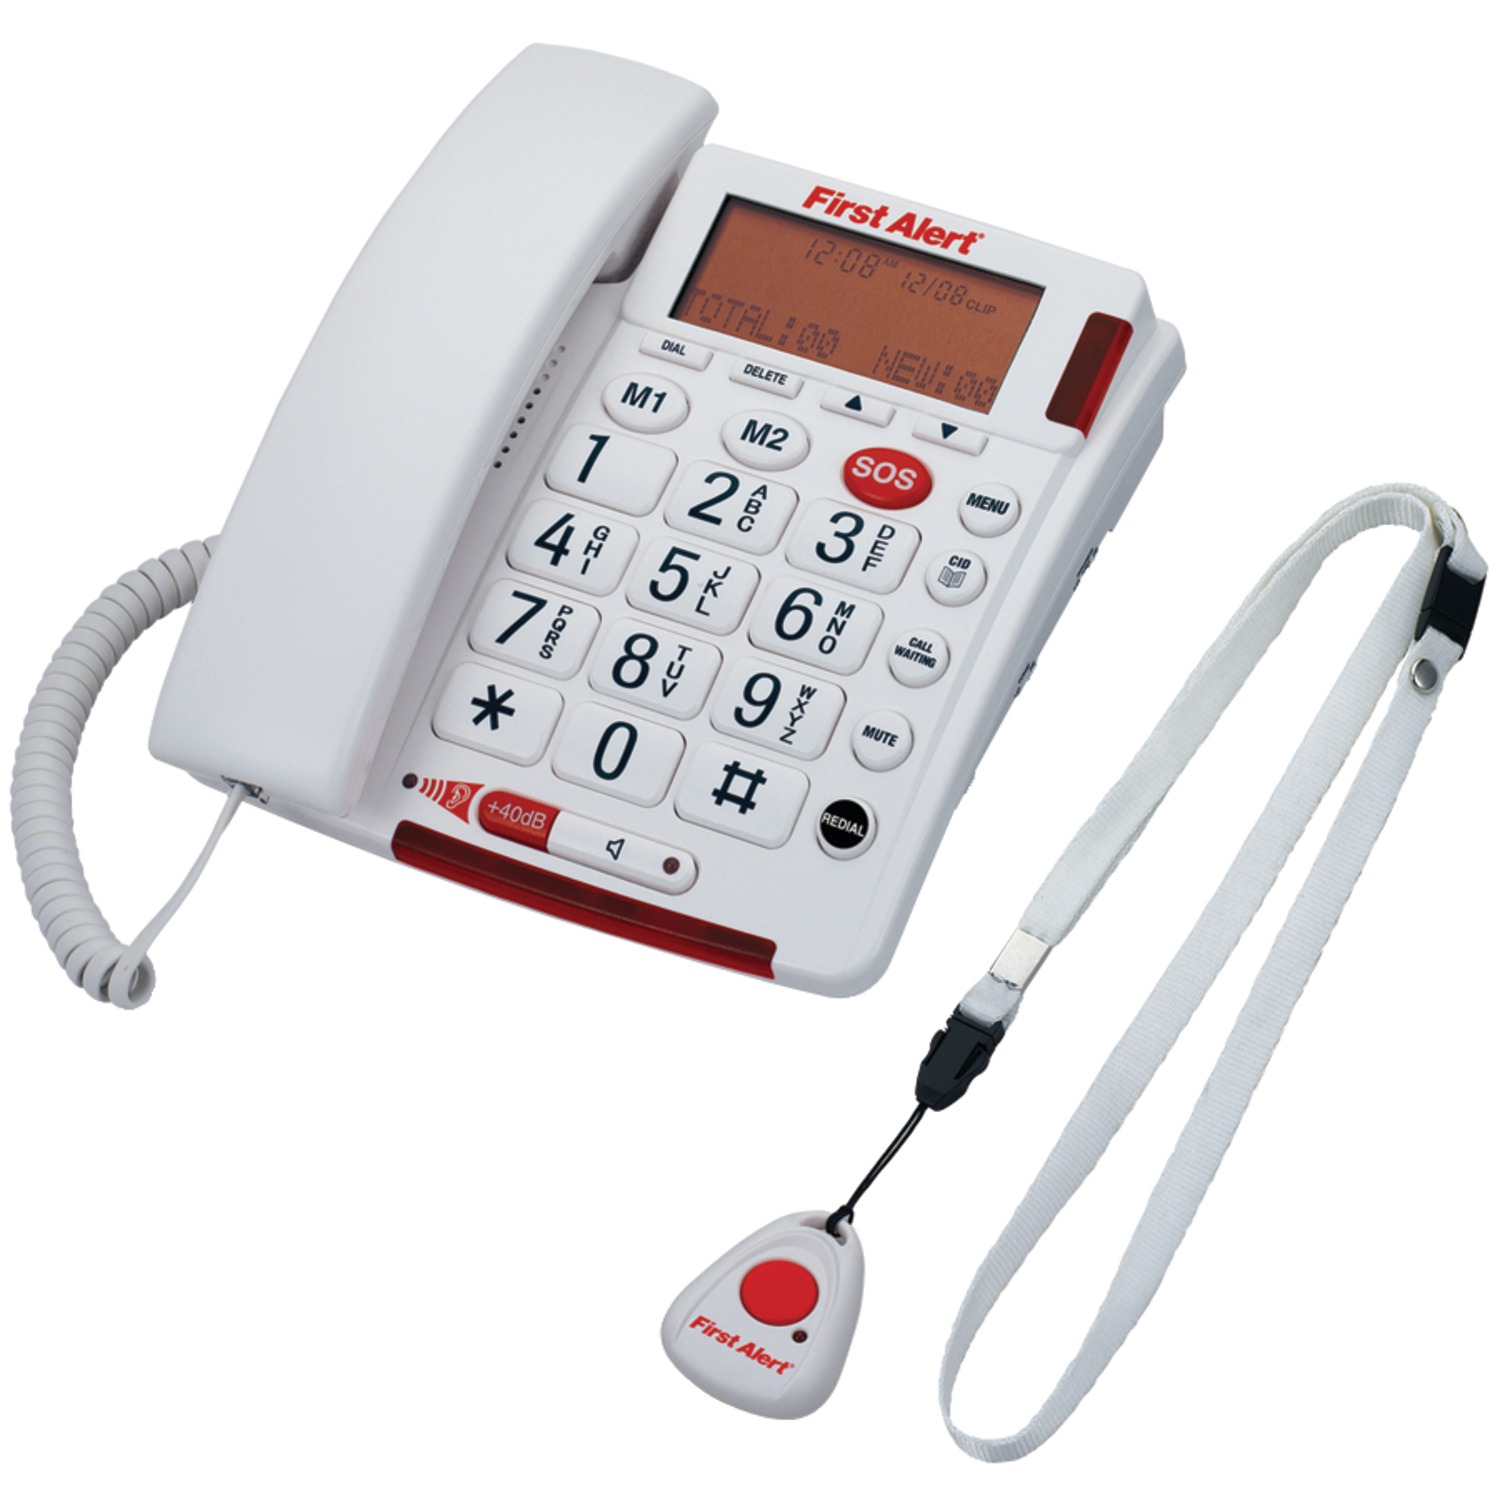 First Alert Sfa3800 Big-button Corded Telephone With Emergency Key & Remote Pendant - image 1 of 2